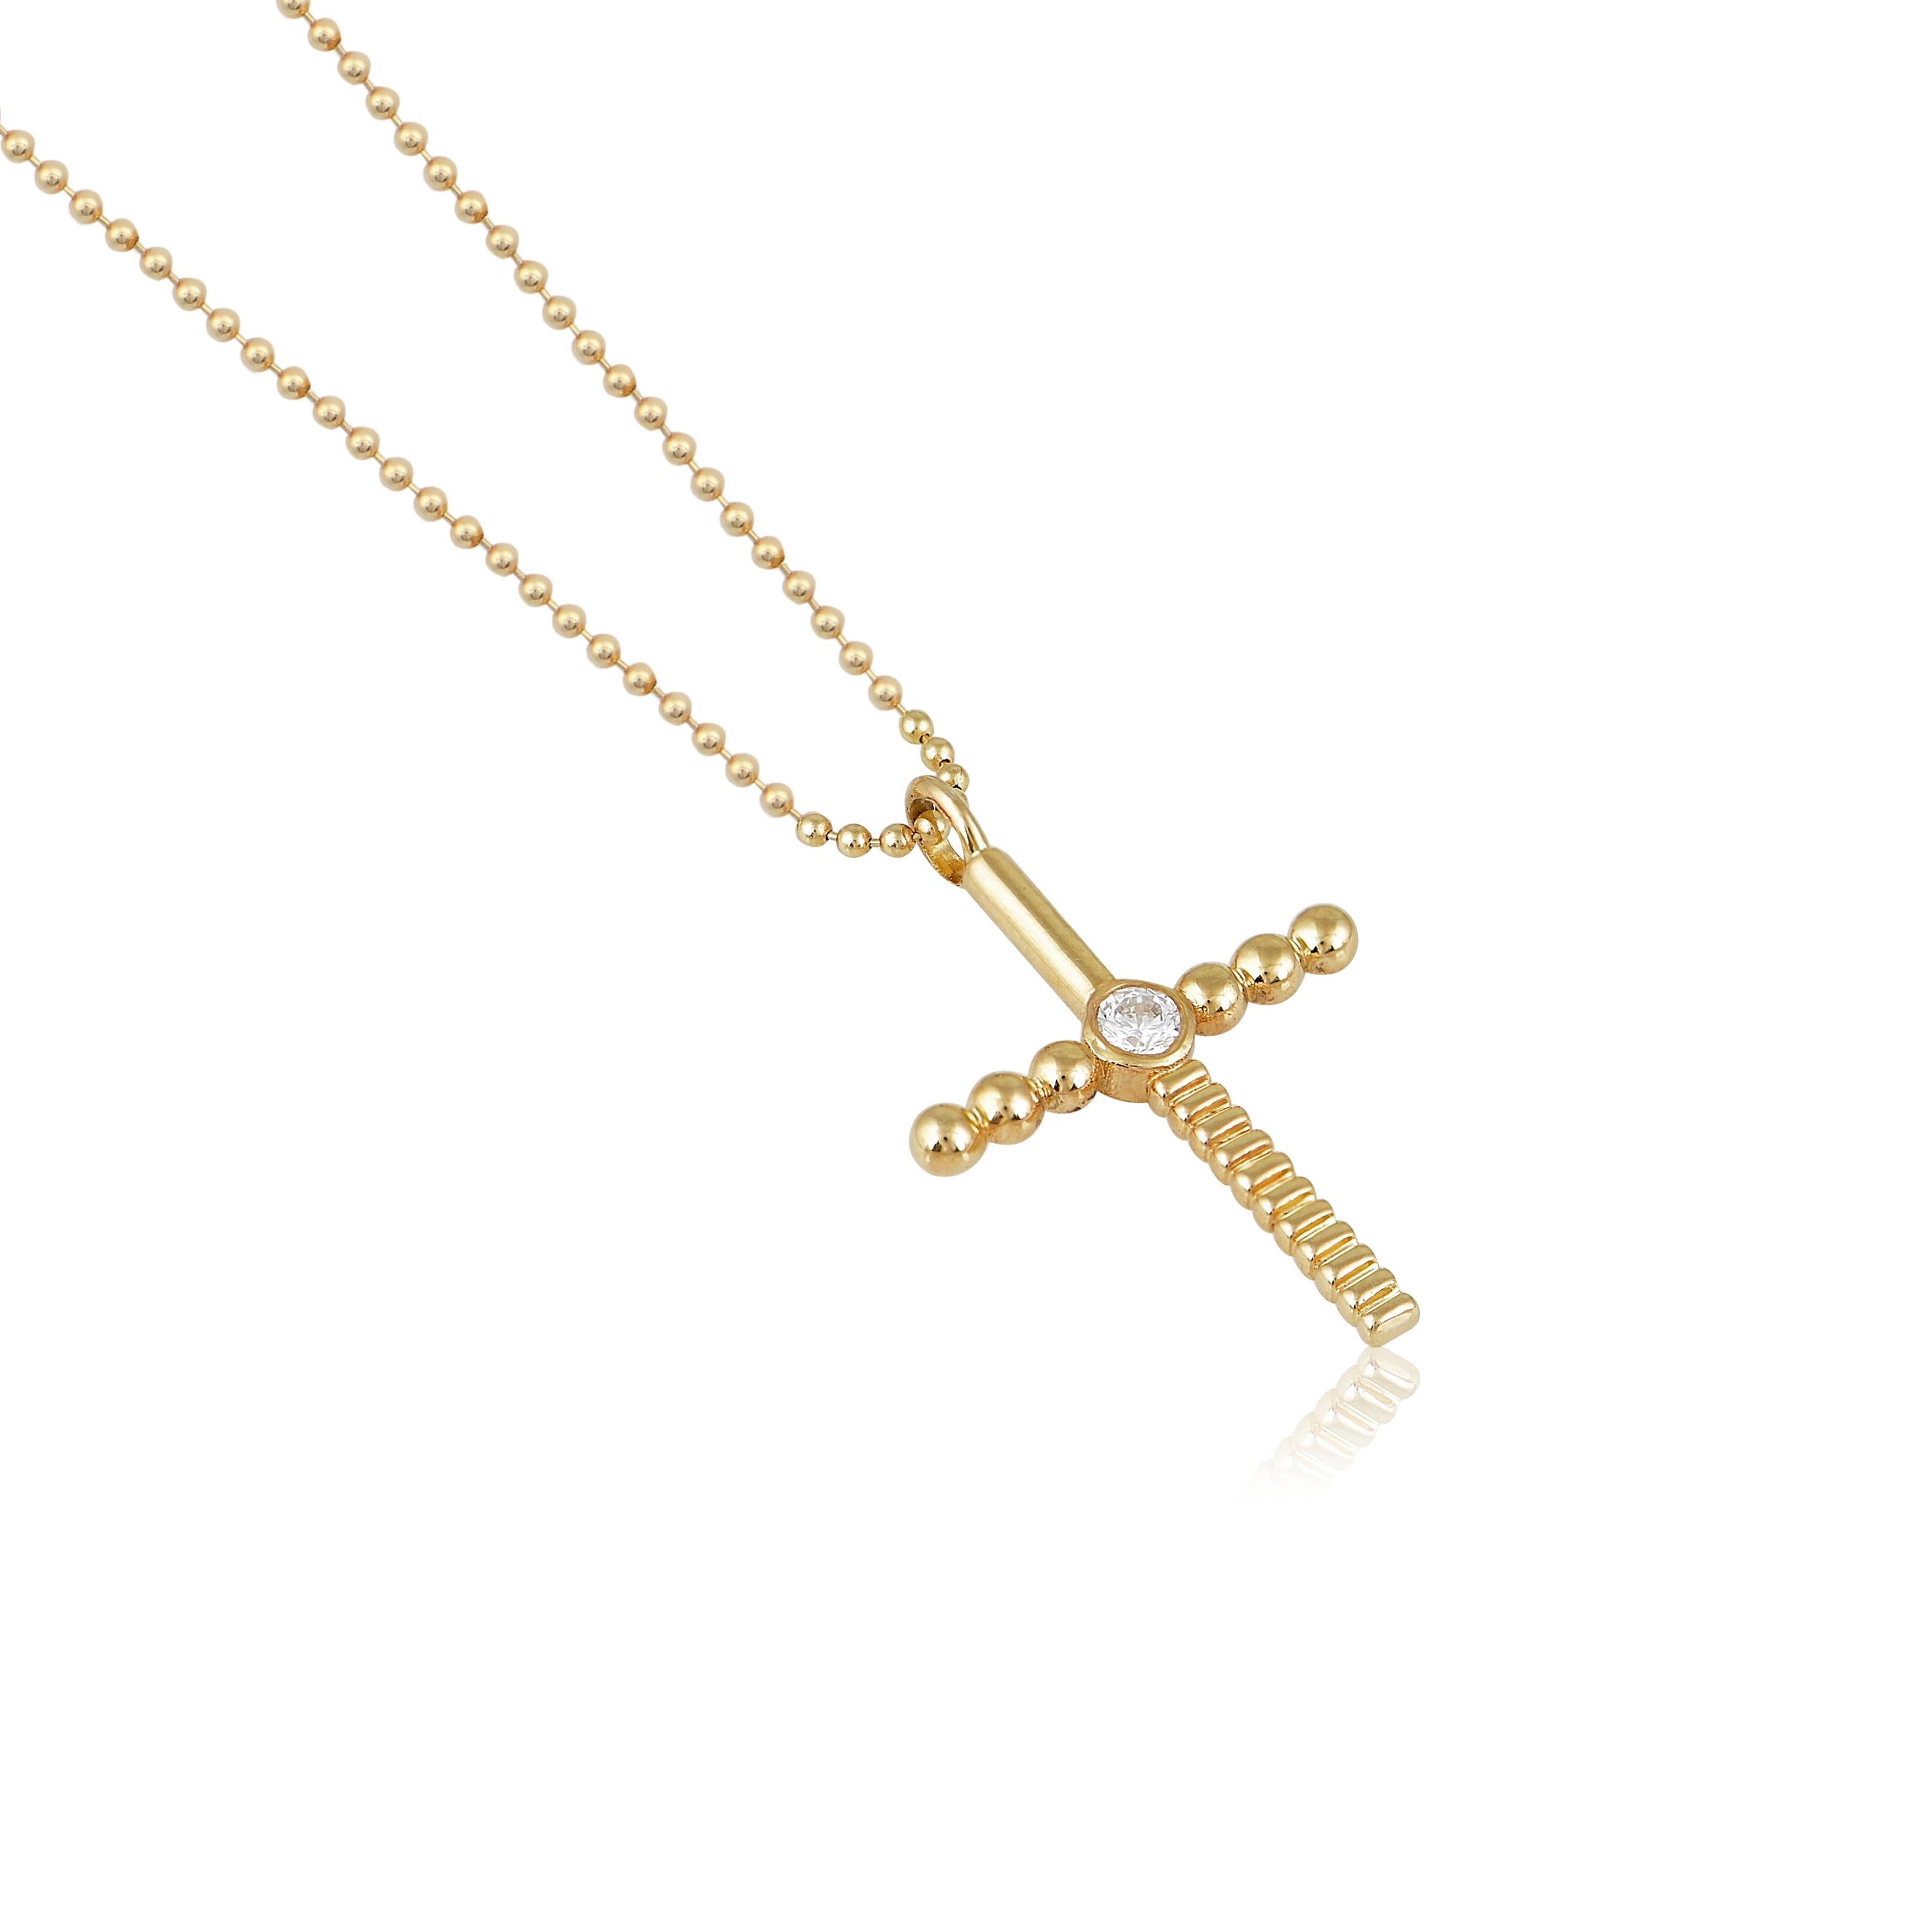 Designer: Alexia Gryllaki

Dimensions: motif L27x27mm, chain 500mm
Weight: approximately 5.1g  (inc. chain)
Barcode: NEX4009


Gold Textures cross pendant in 18 karat yellow gold with a 500mm ball-chain, set with a round brilliant-cut diamond